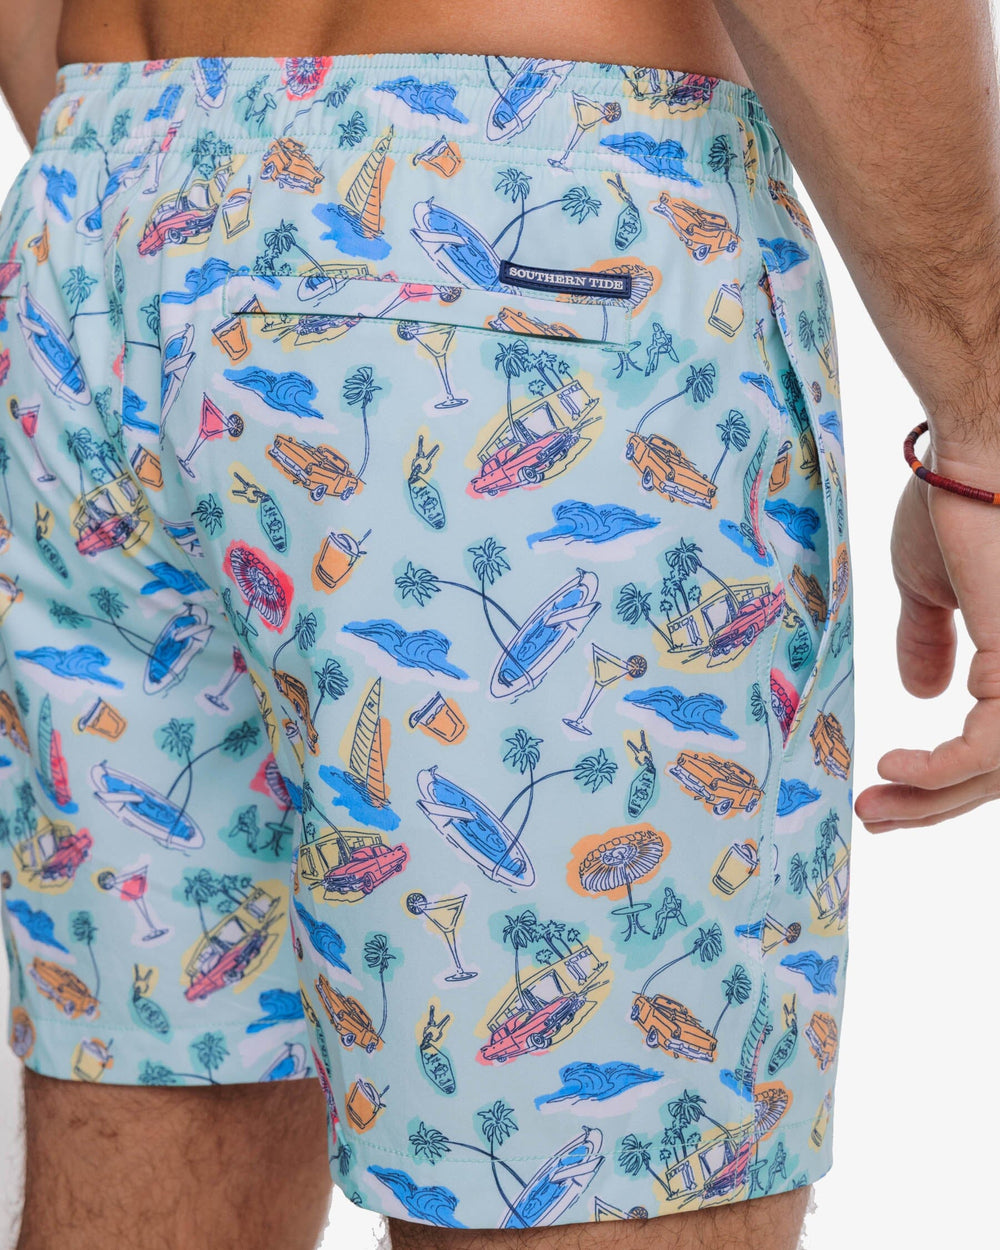 The detail view of the Southern Tide Poolside View Swim Trunk by Southern Tide - Baltic Teal